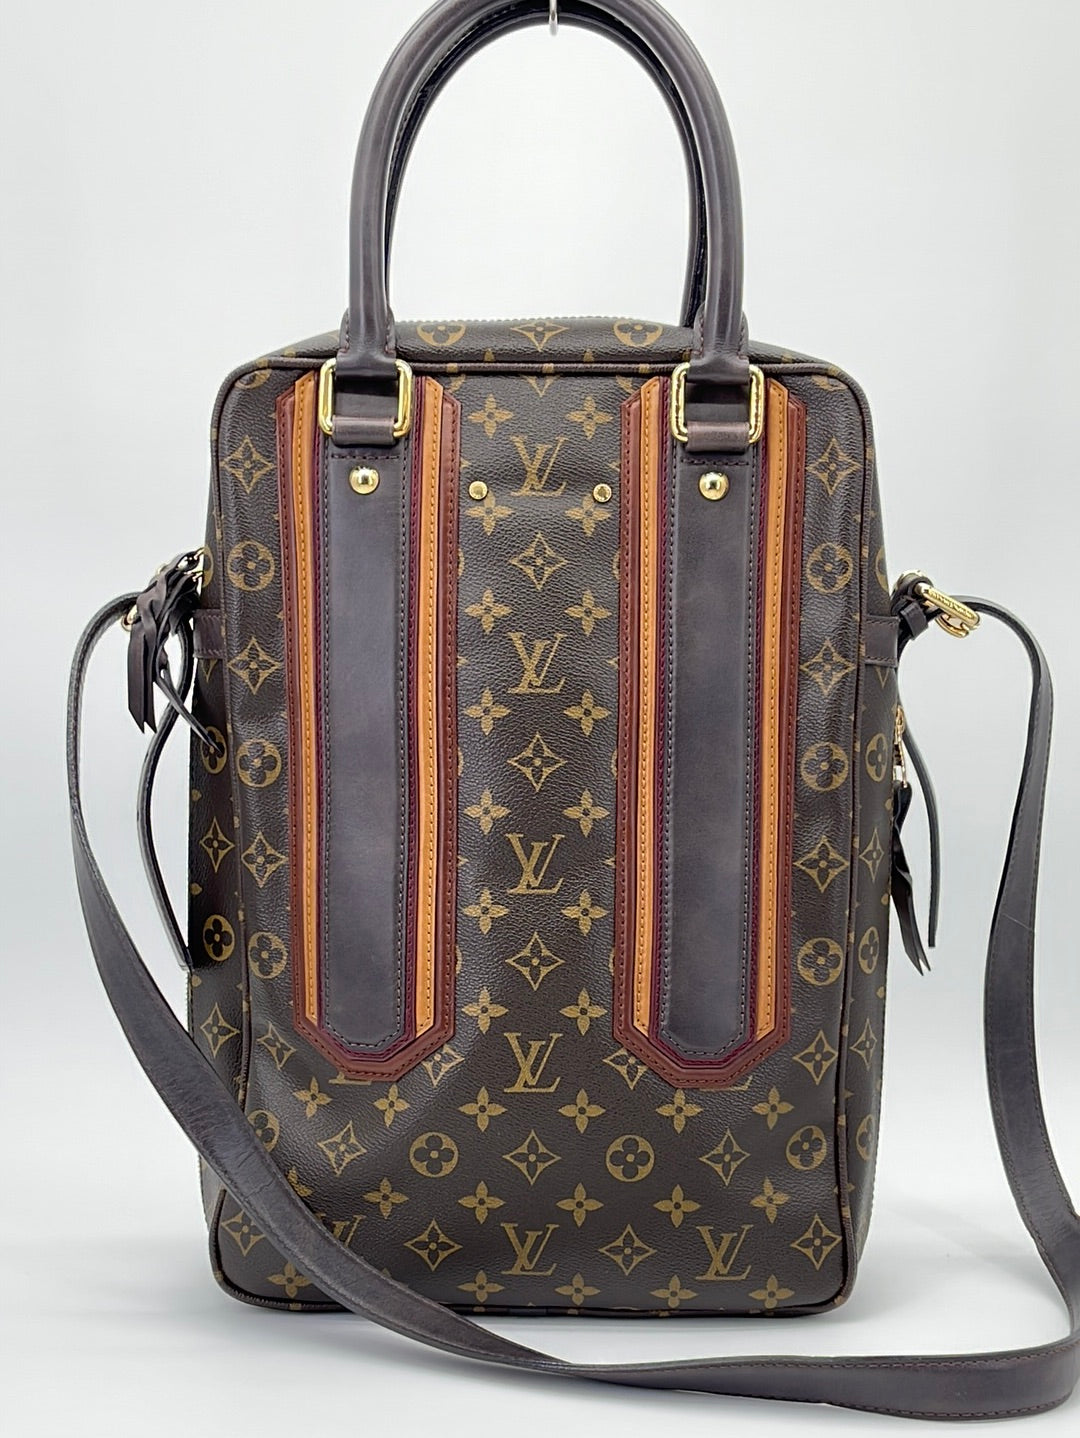 Buy Authentic, Preloved Louis Vuitton Mirage Speedy 30 Bags from